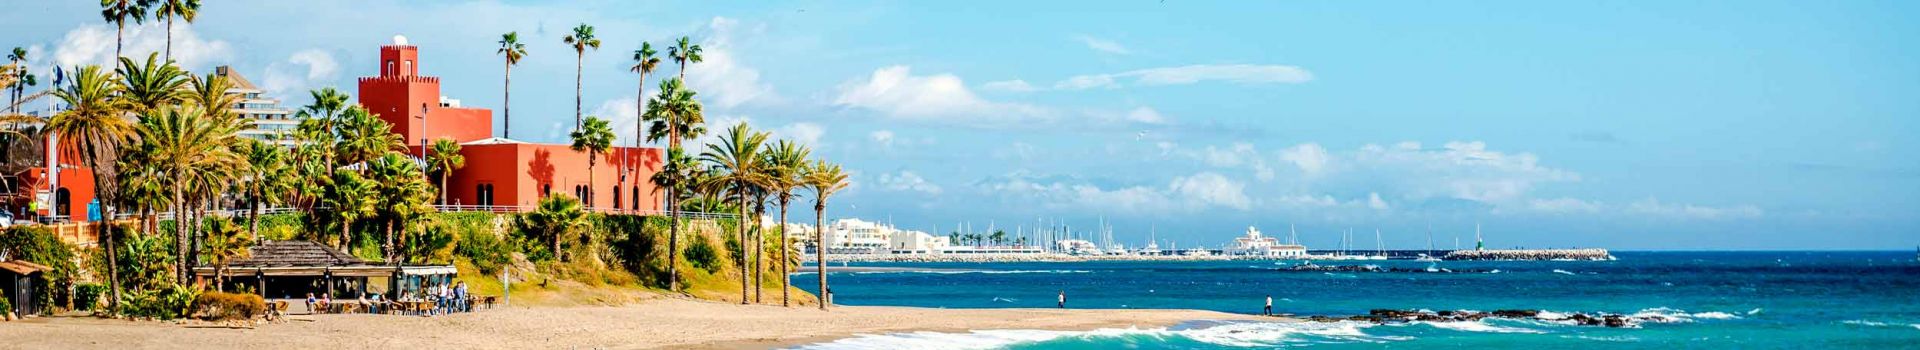 Cheap holidays from Shannon to Costa del Sol with Cassidy Travel